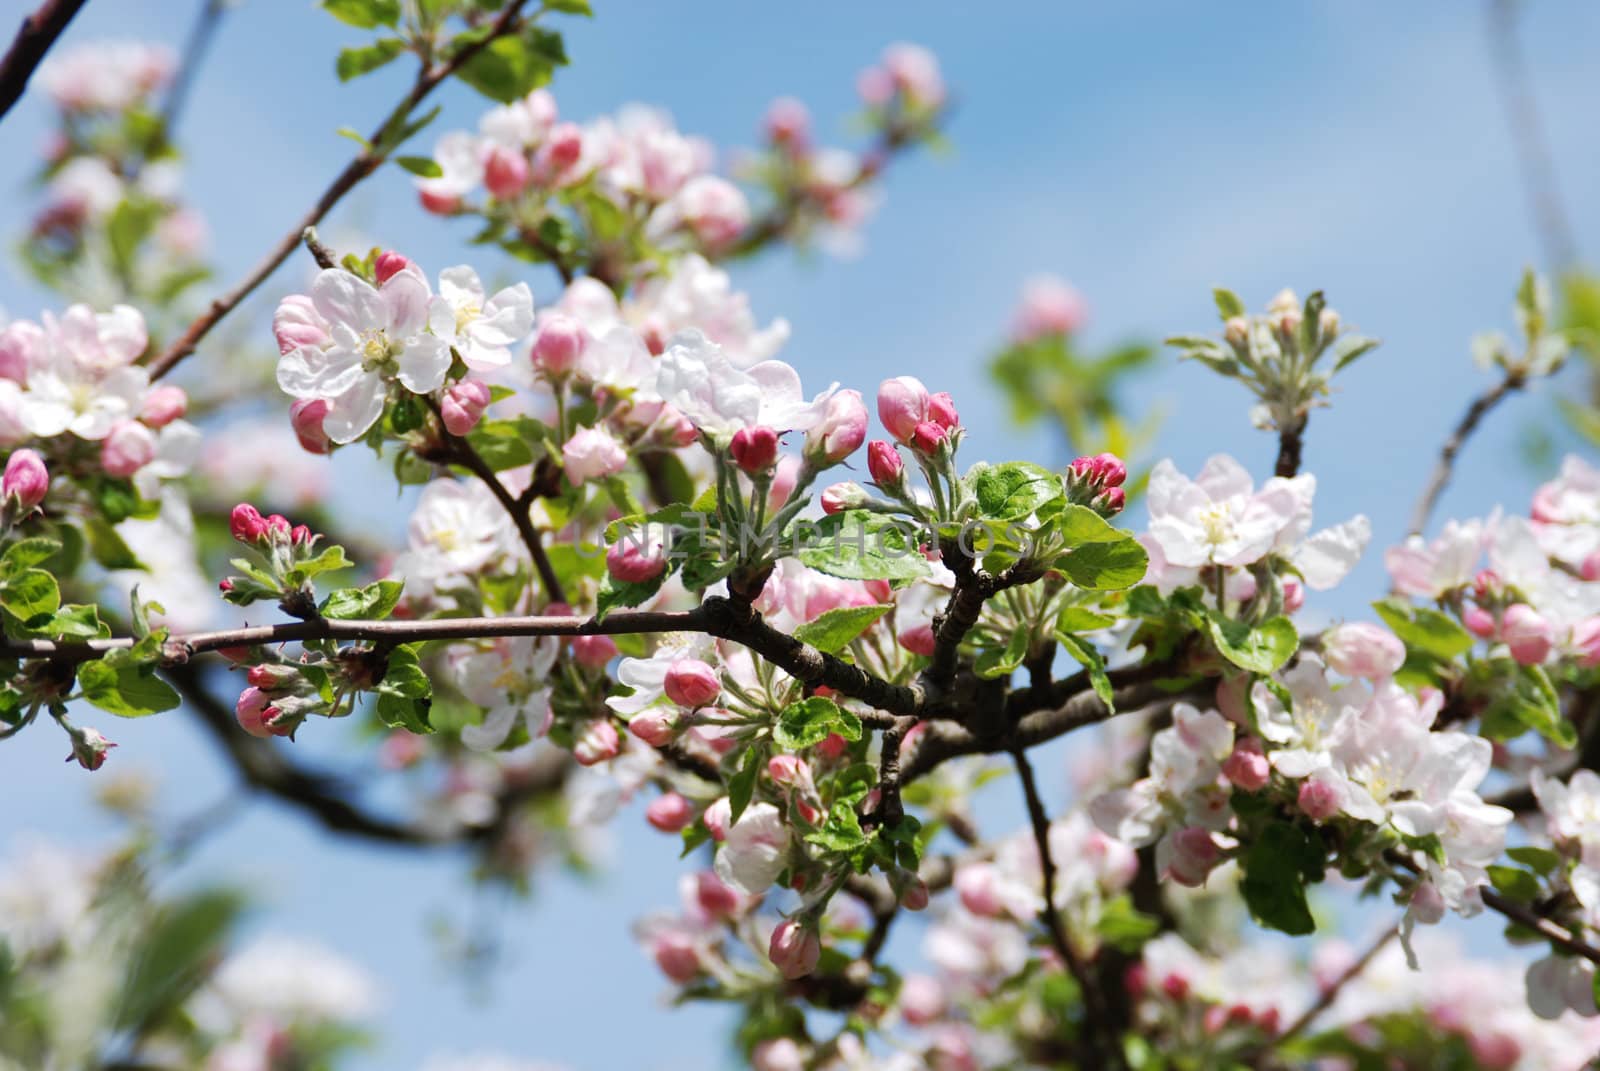 Apple tree in blossom by Riviera